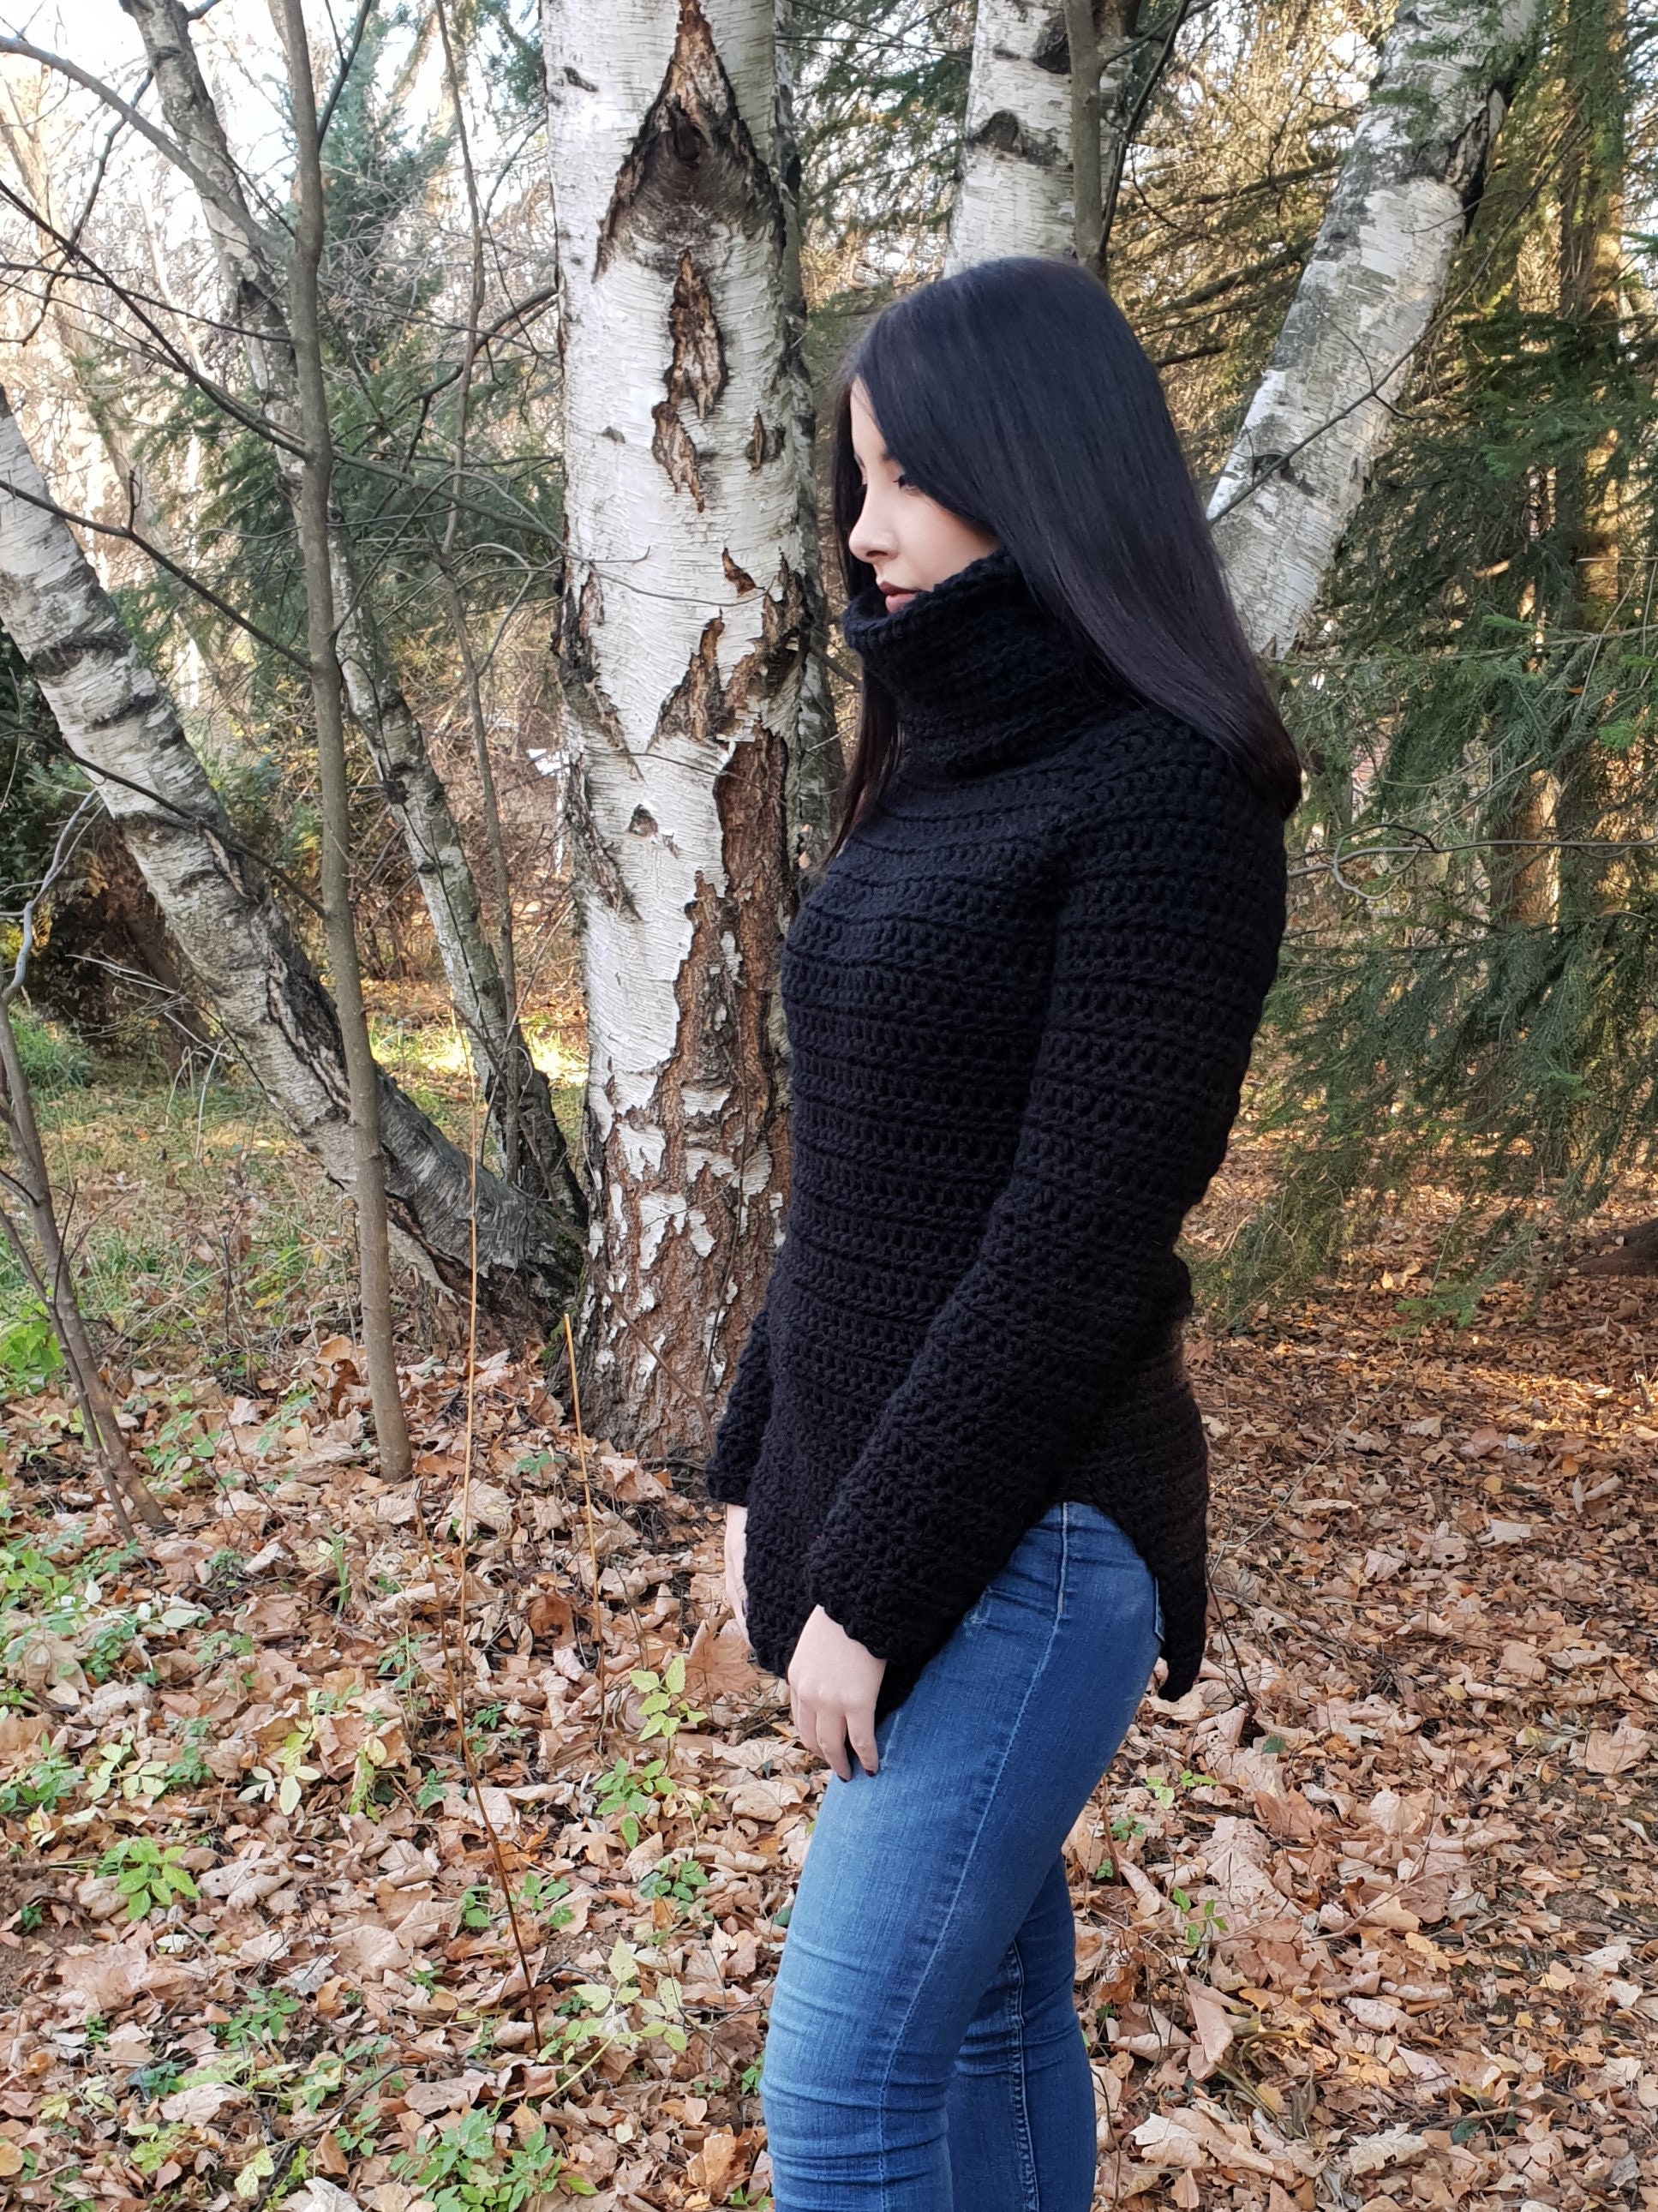 Turtleneck Sweater, Oversized Sweater Tunic, Black Sweaters for Women, Plus  Size Tunic, Wool Sweater, Stand up Collar Sweater 